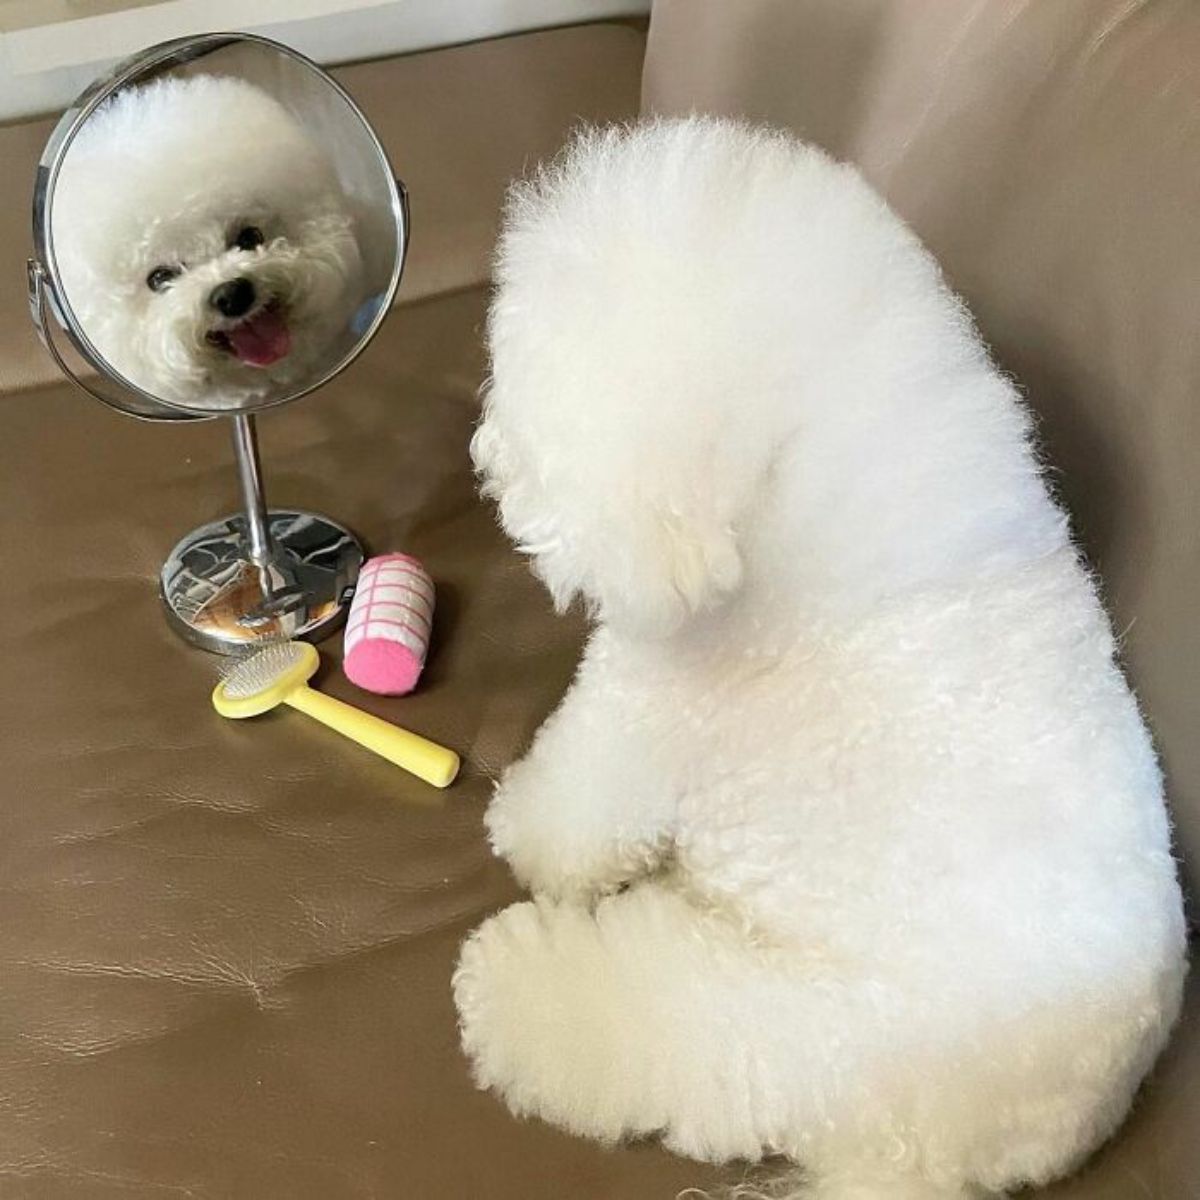 small fluffy white dog sitting on brown sofa looking in a round mirror next to a yellow brush and pink and white toy